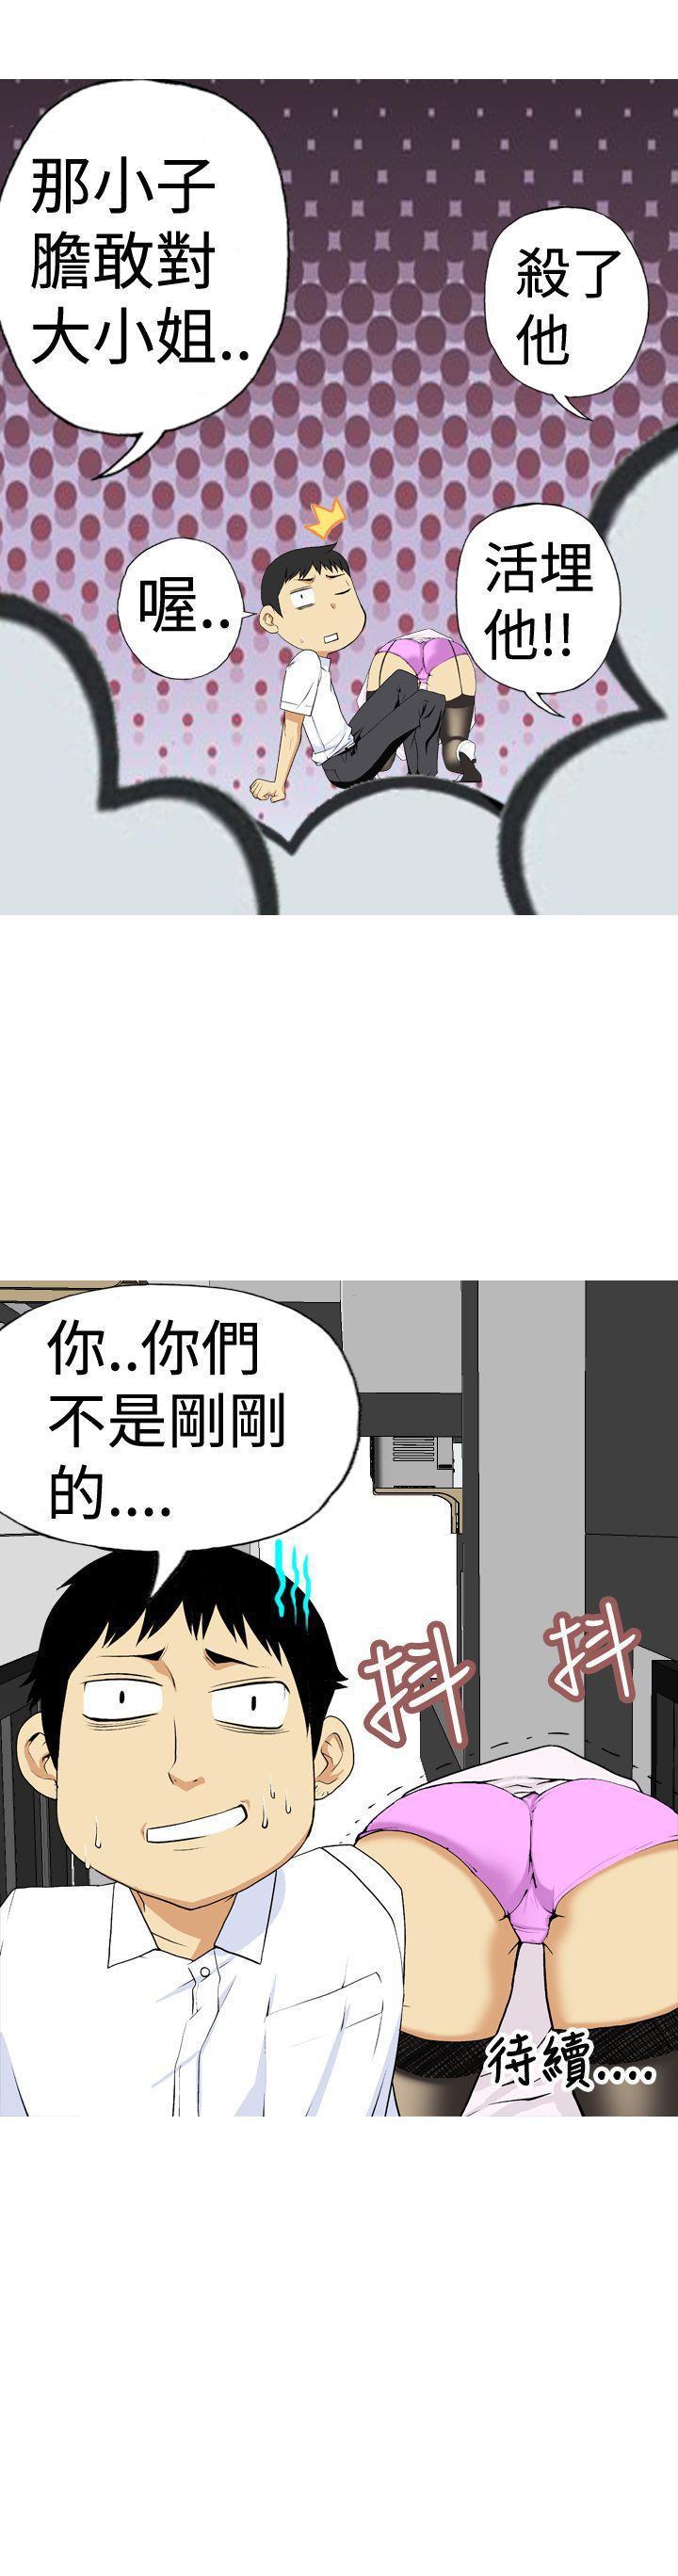 Doggy 目標就是妳內褲 1-24 Moaning - Page 6